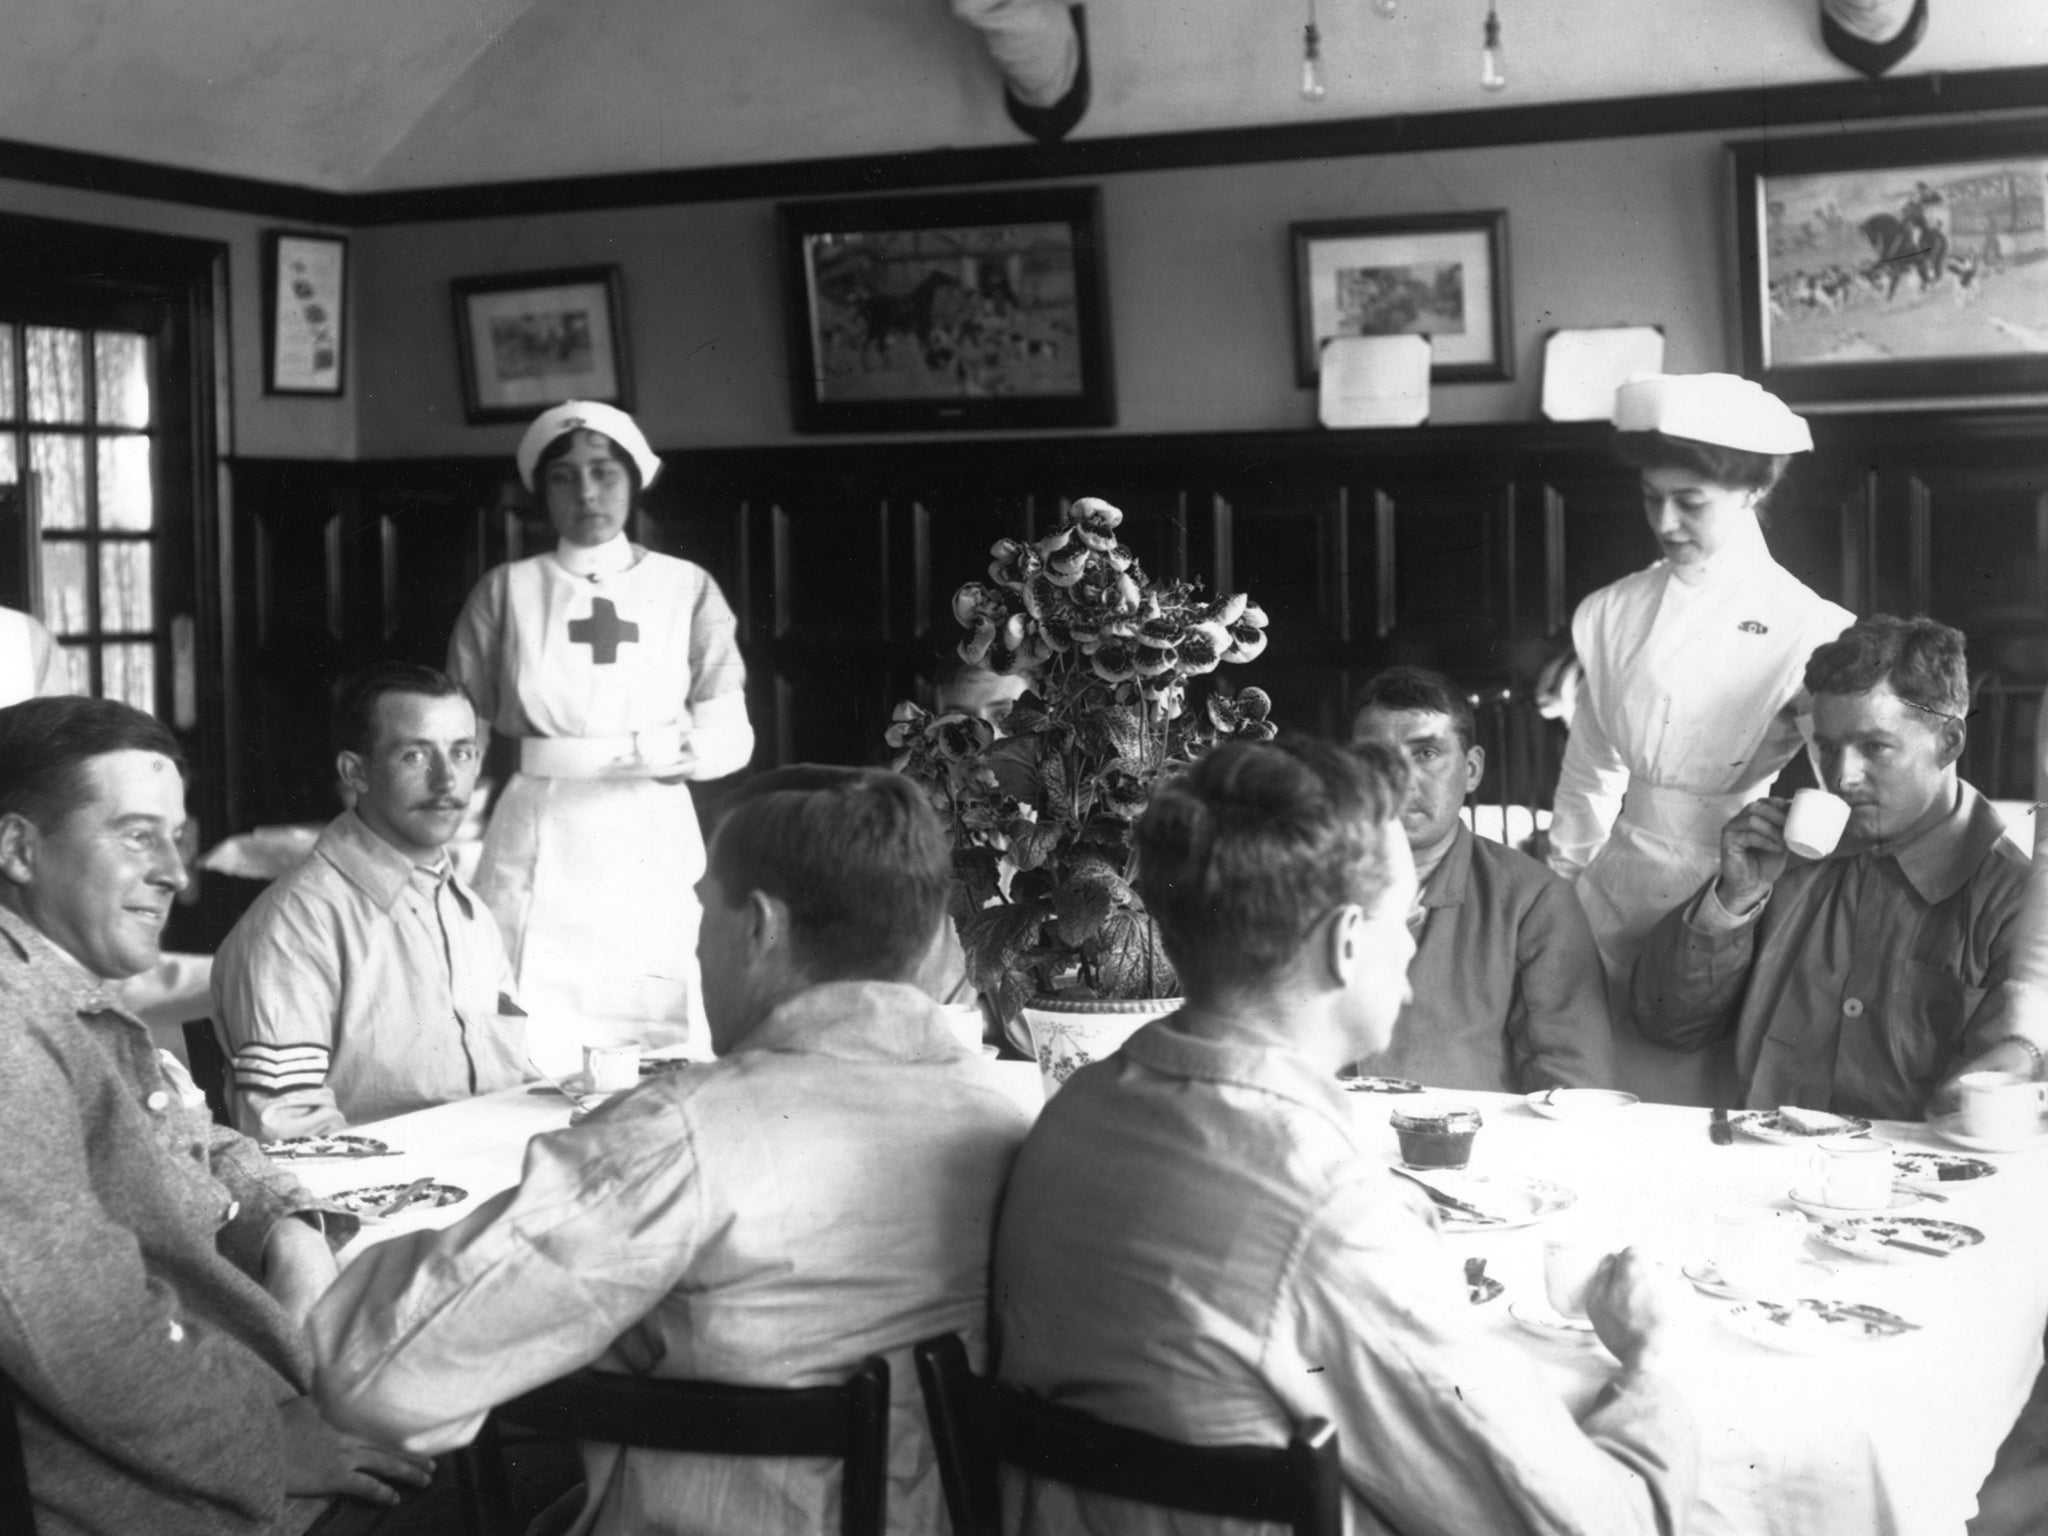 Pat Barker's Regeneration explores the experience of British army officers being treated for shell shock during World War I at a hospital in Edinburgh